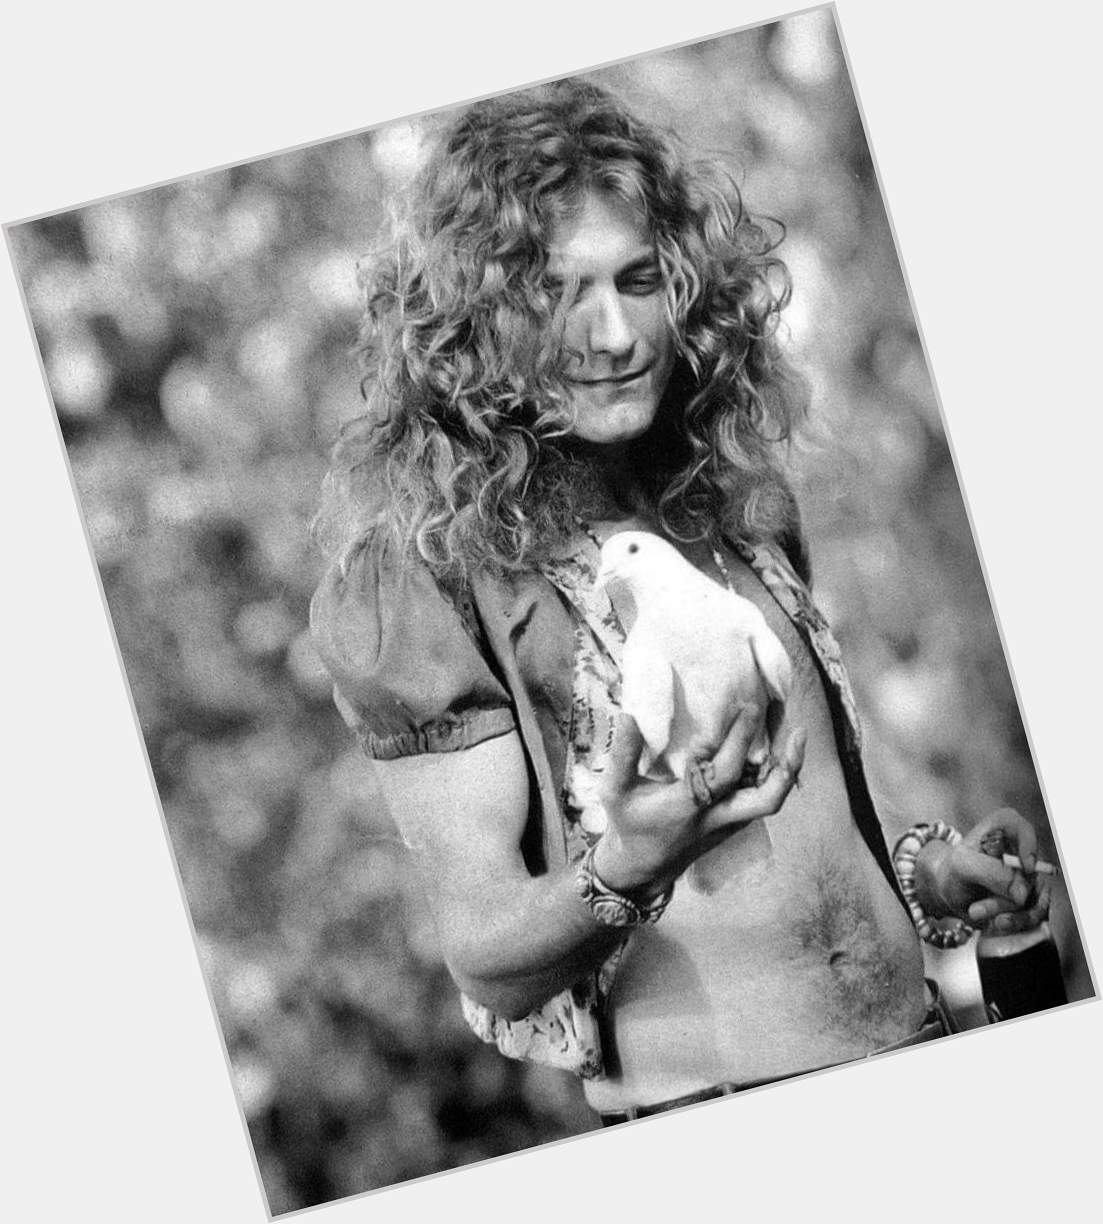 Happy Birthday to Robert Plant who turns 70 today! 